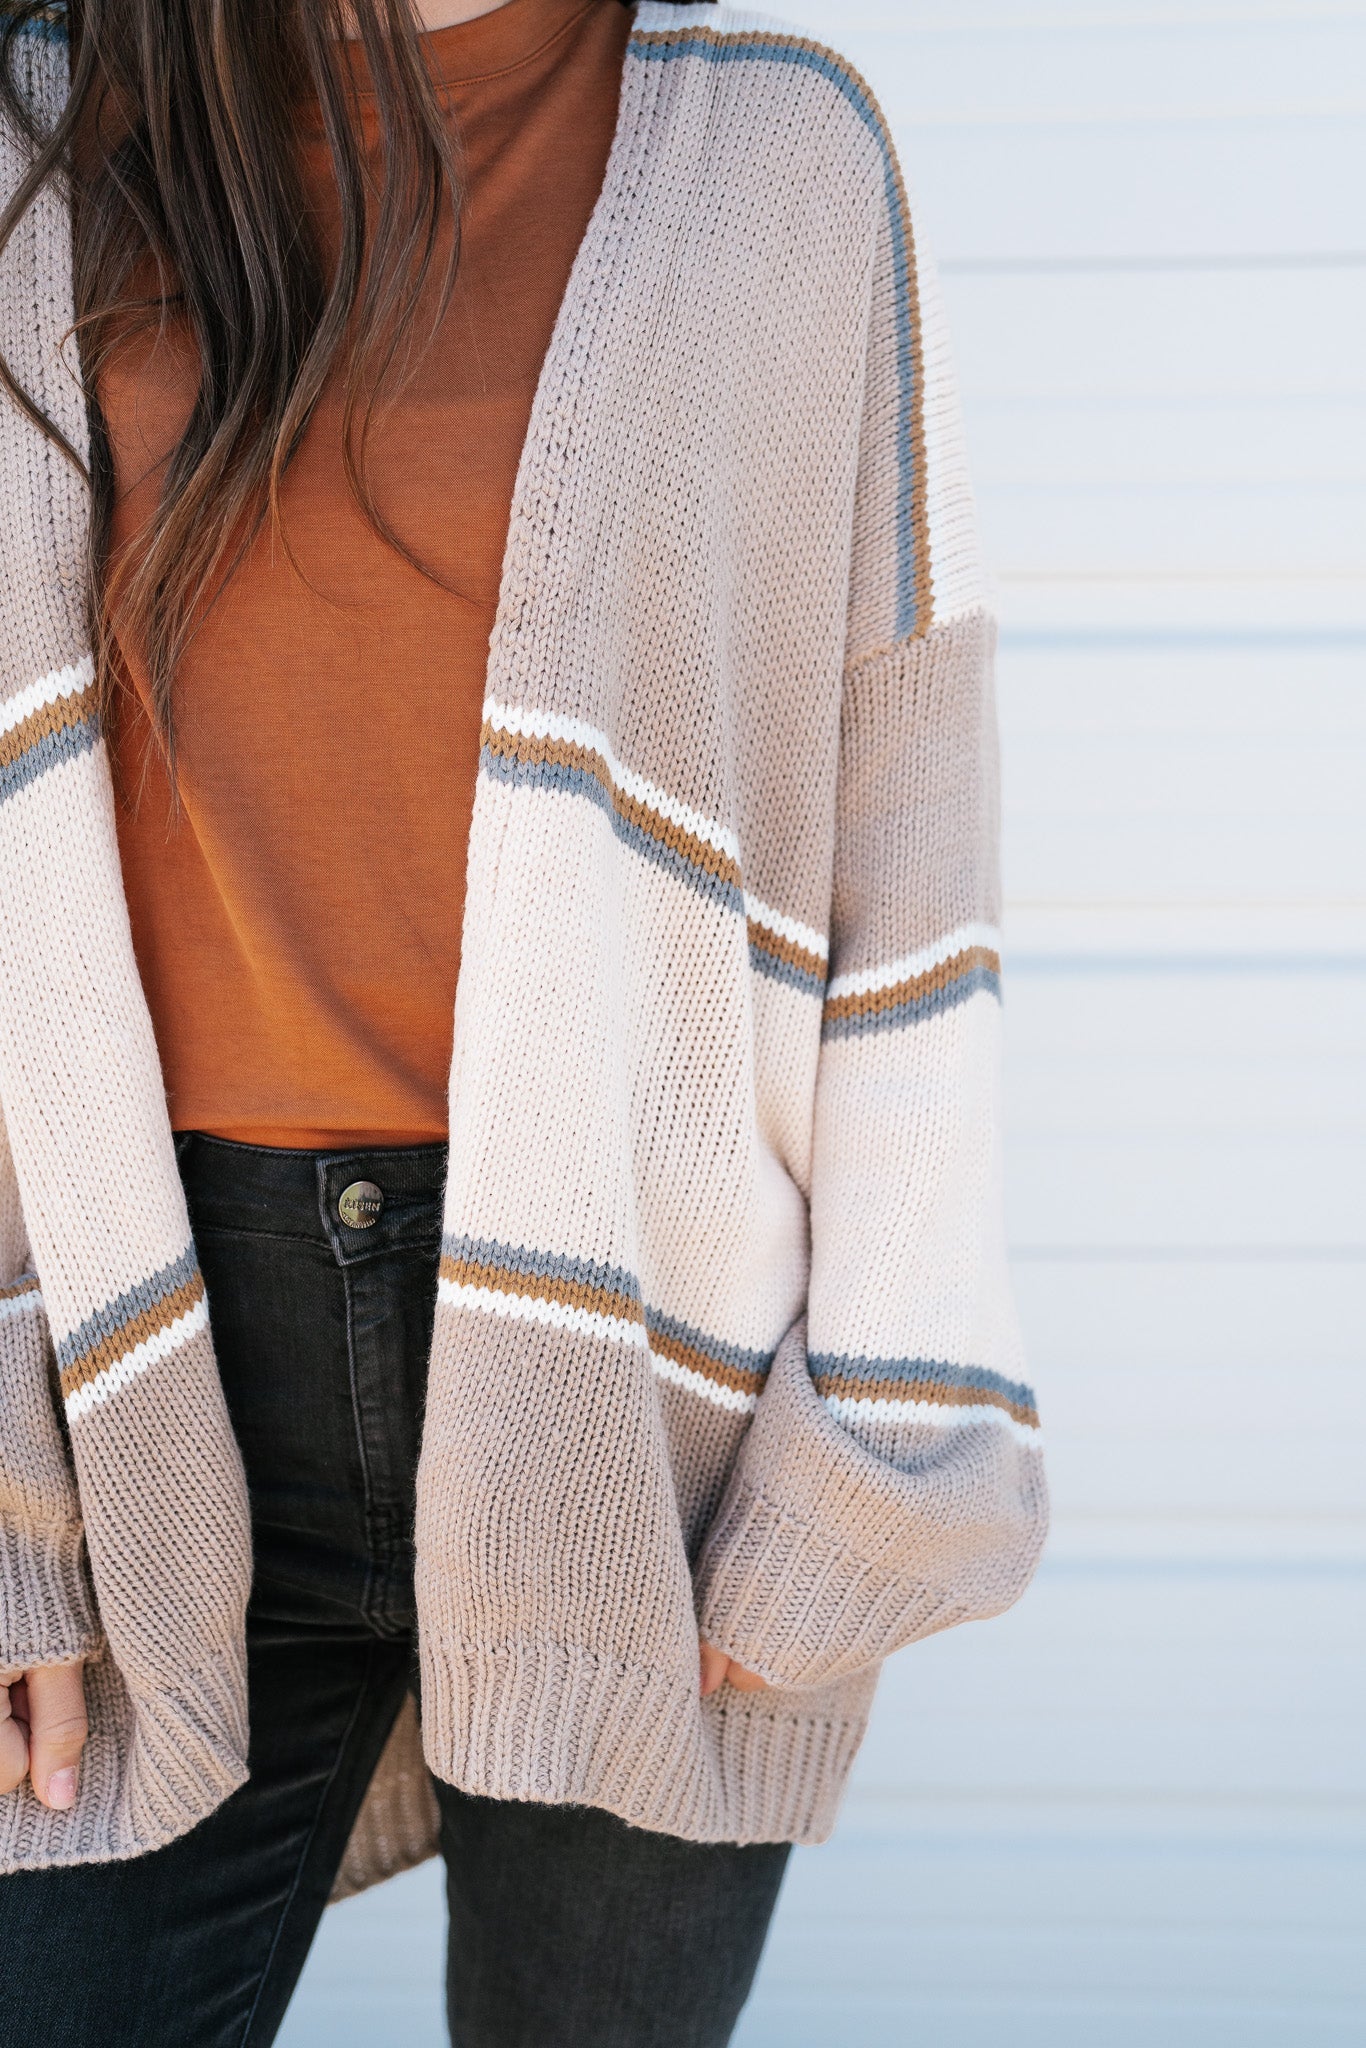 Evelyn Color Block Striped Cardigan